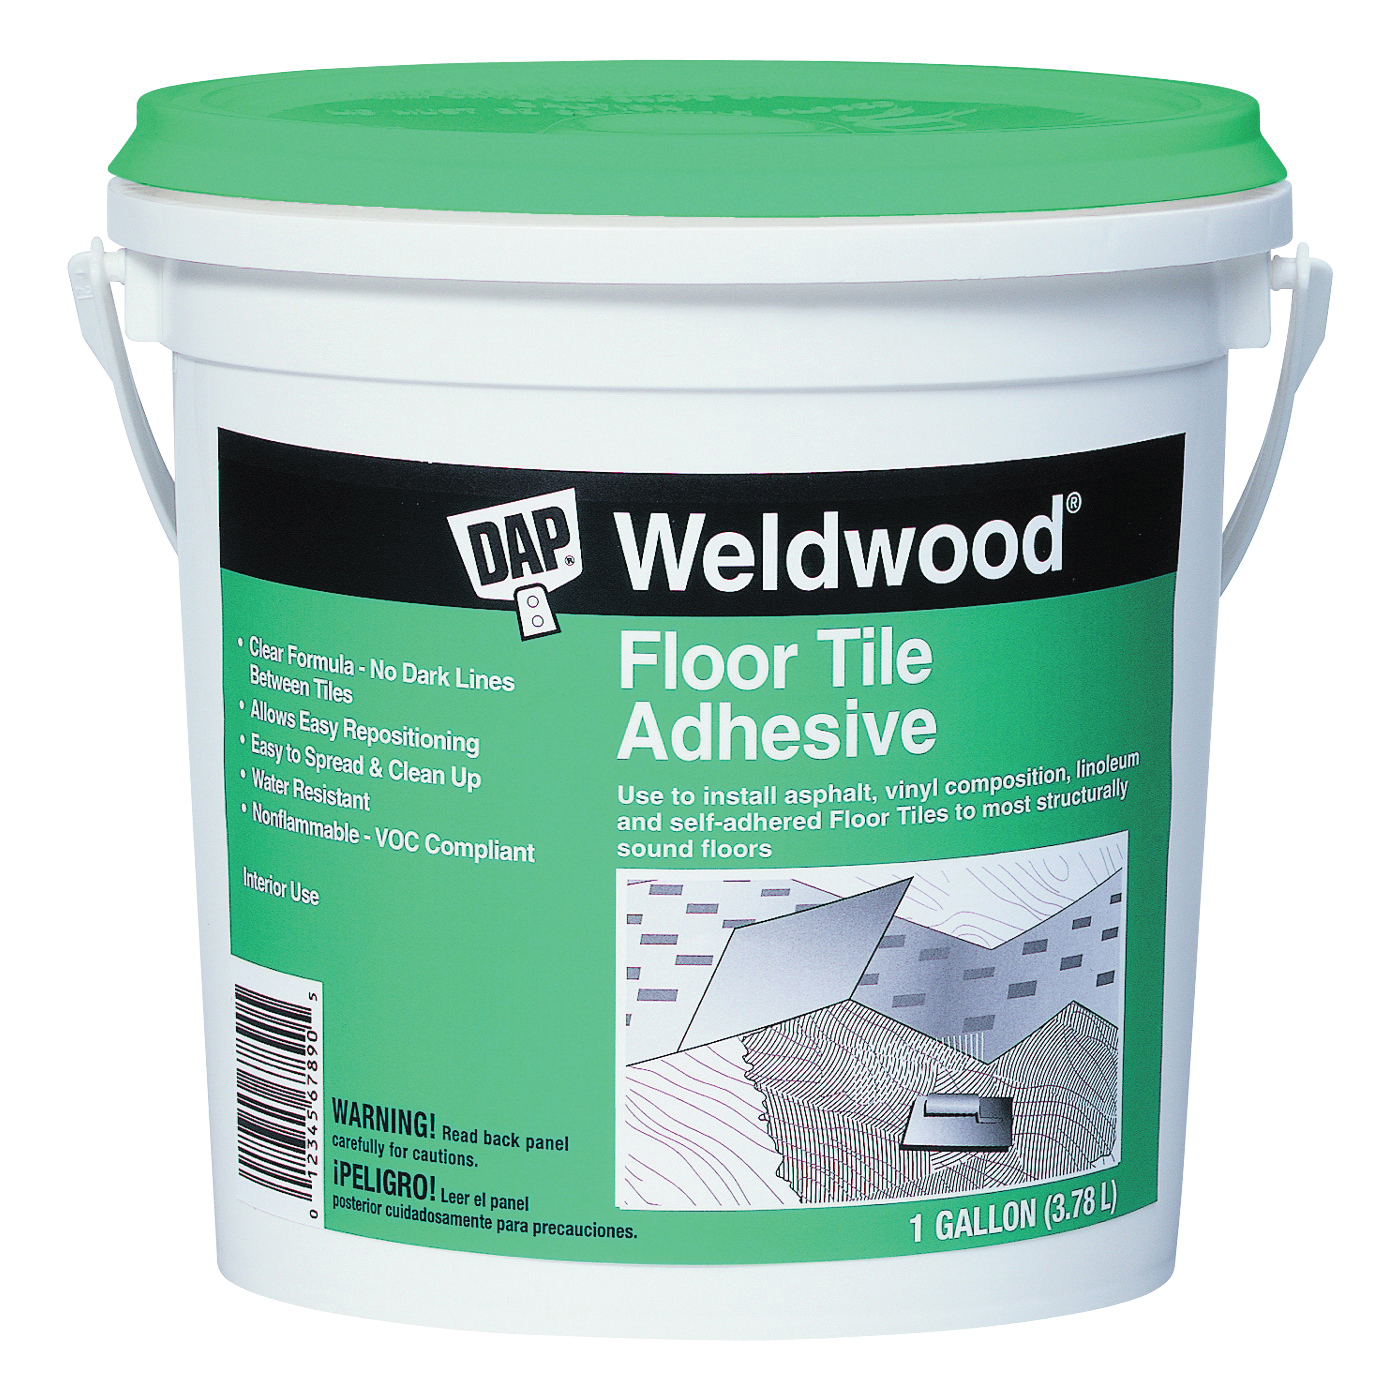 00137 Floor Tile Adhesive, Clear, 1 gal Pail